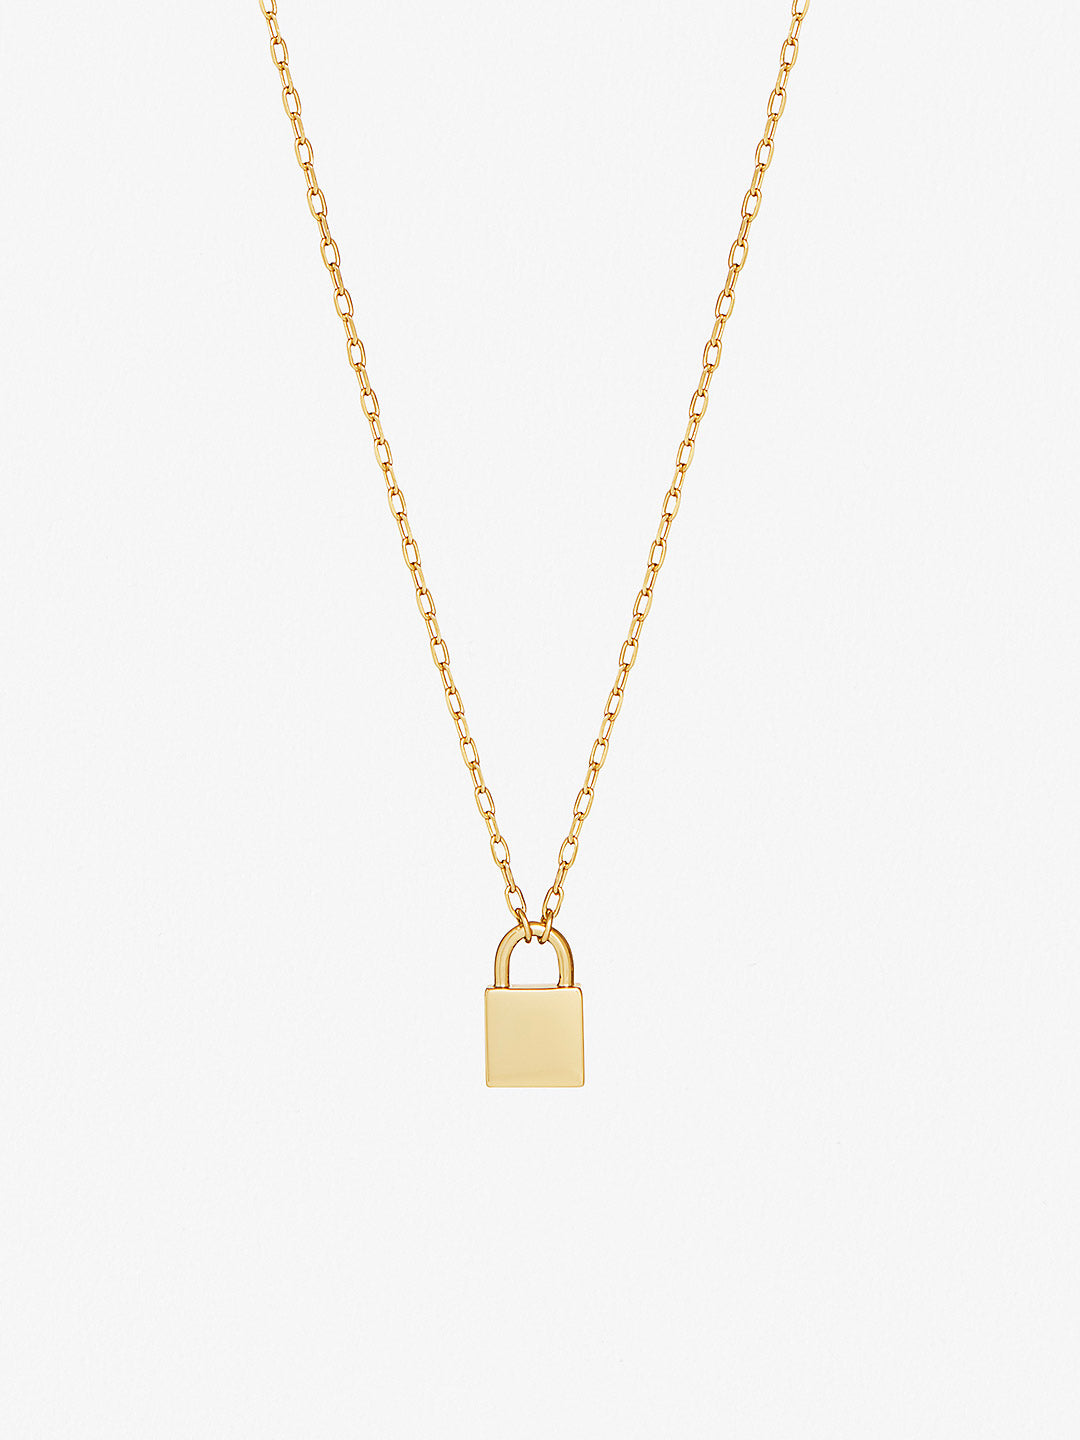 necklace gold lock